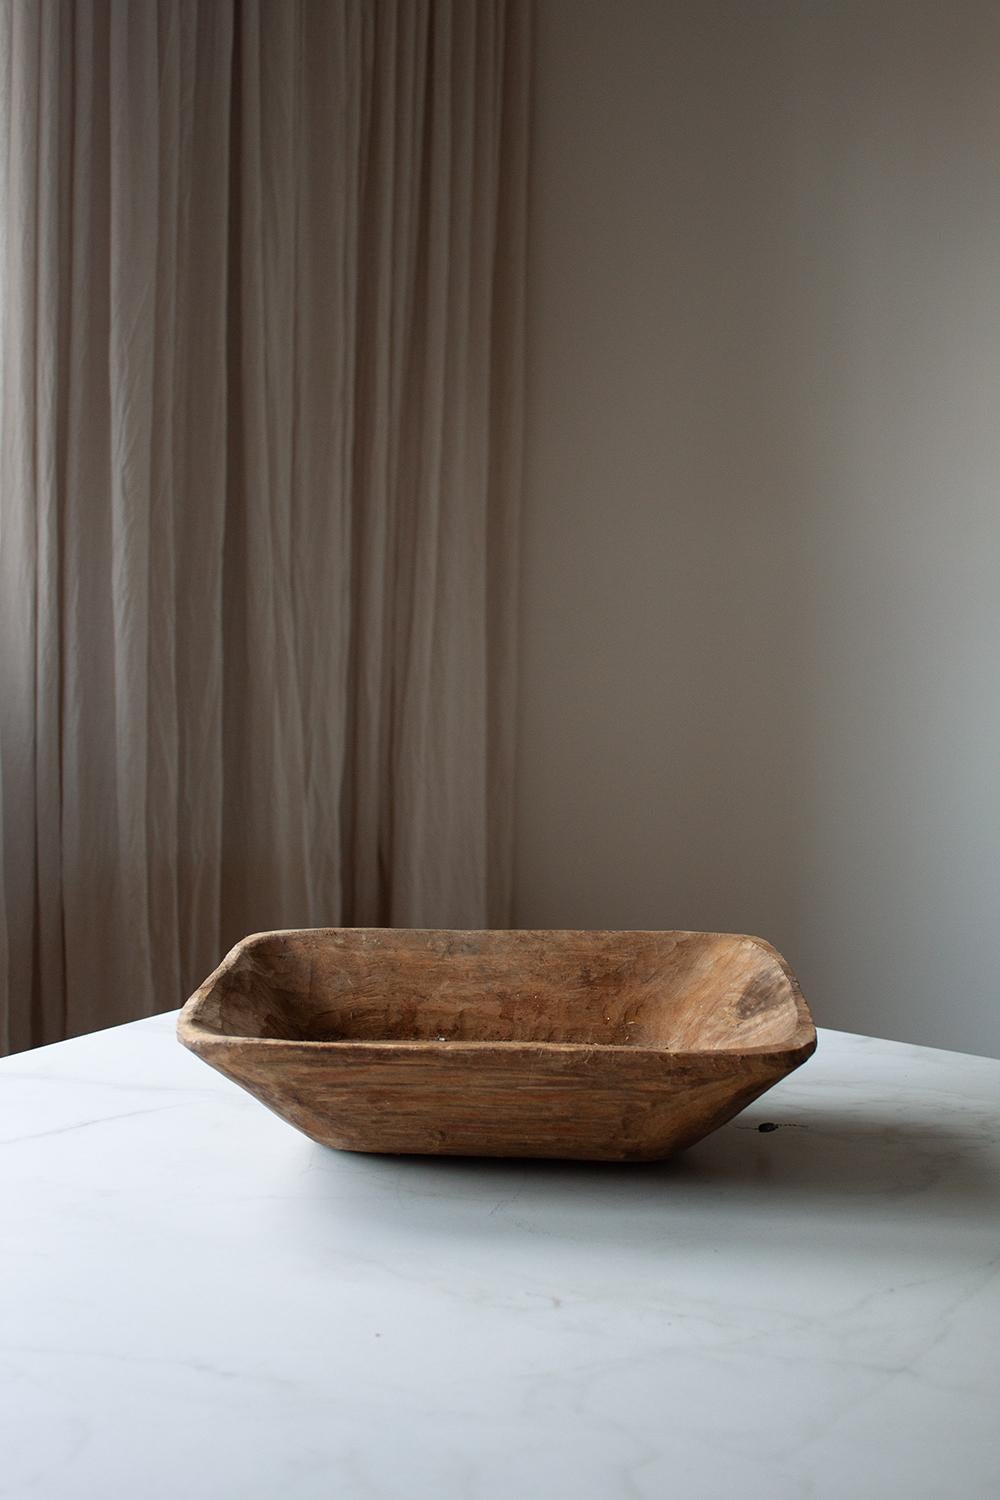 This Bowl is a blend of rustic charm and wood craftsmanship. Handcrafted by french traditional woodworker, each bowl is a unique piece that captures the essence of French provincial style. (This bowl is one out of a set of 4, which are available in